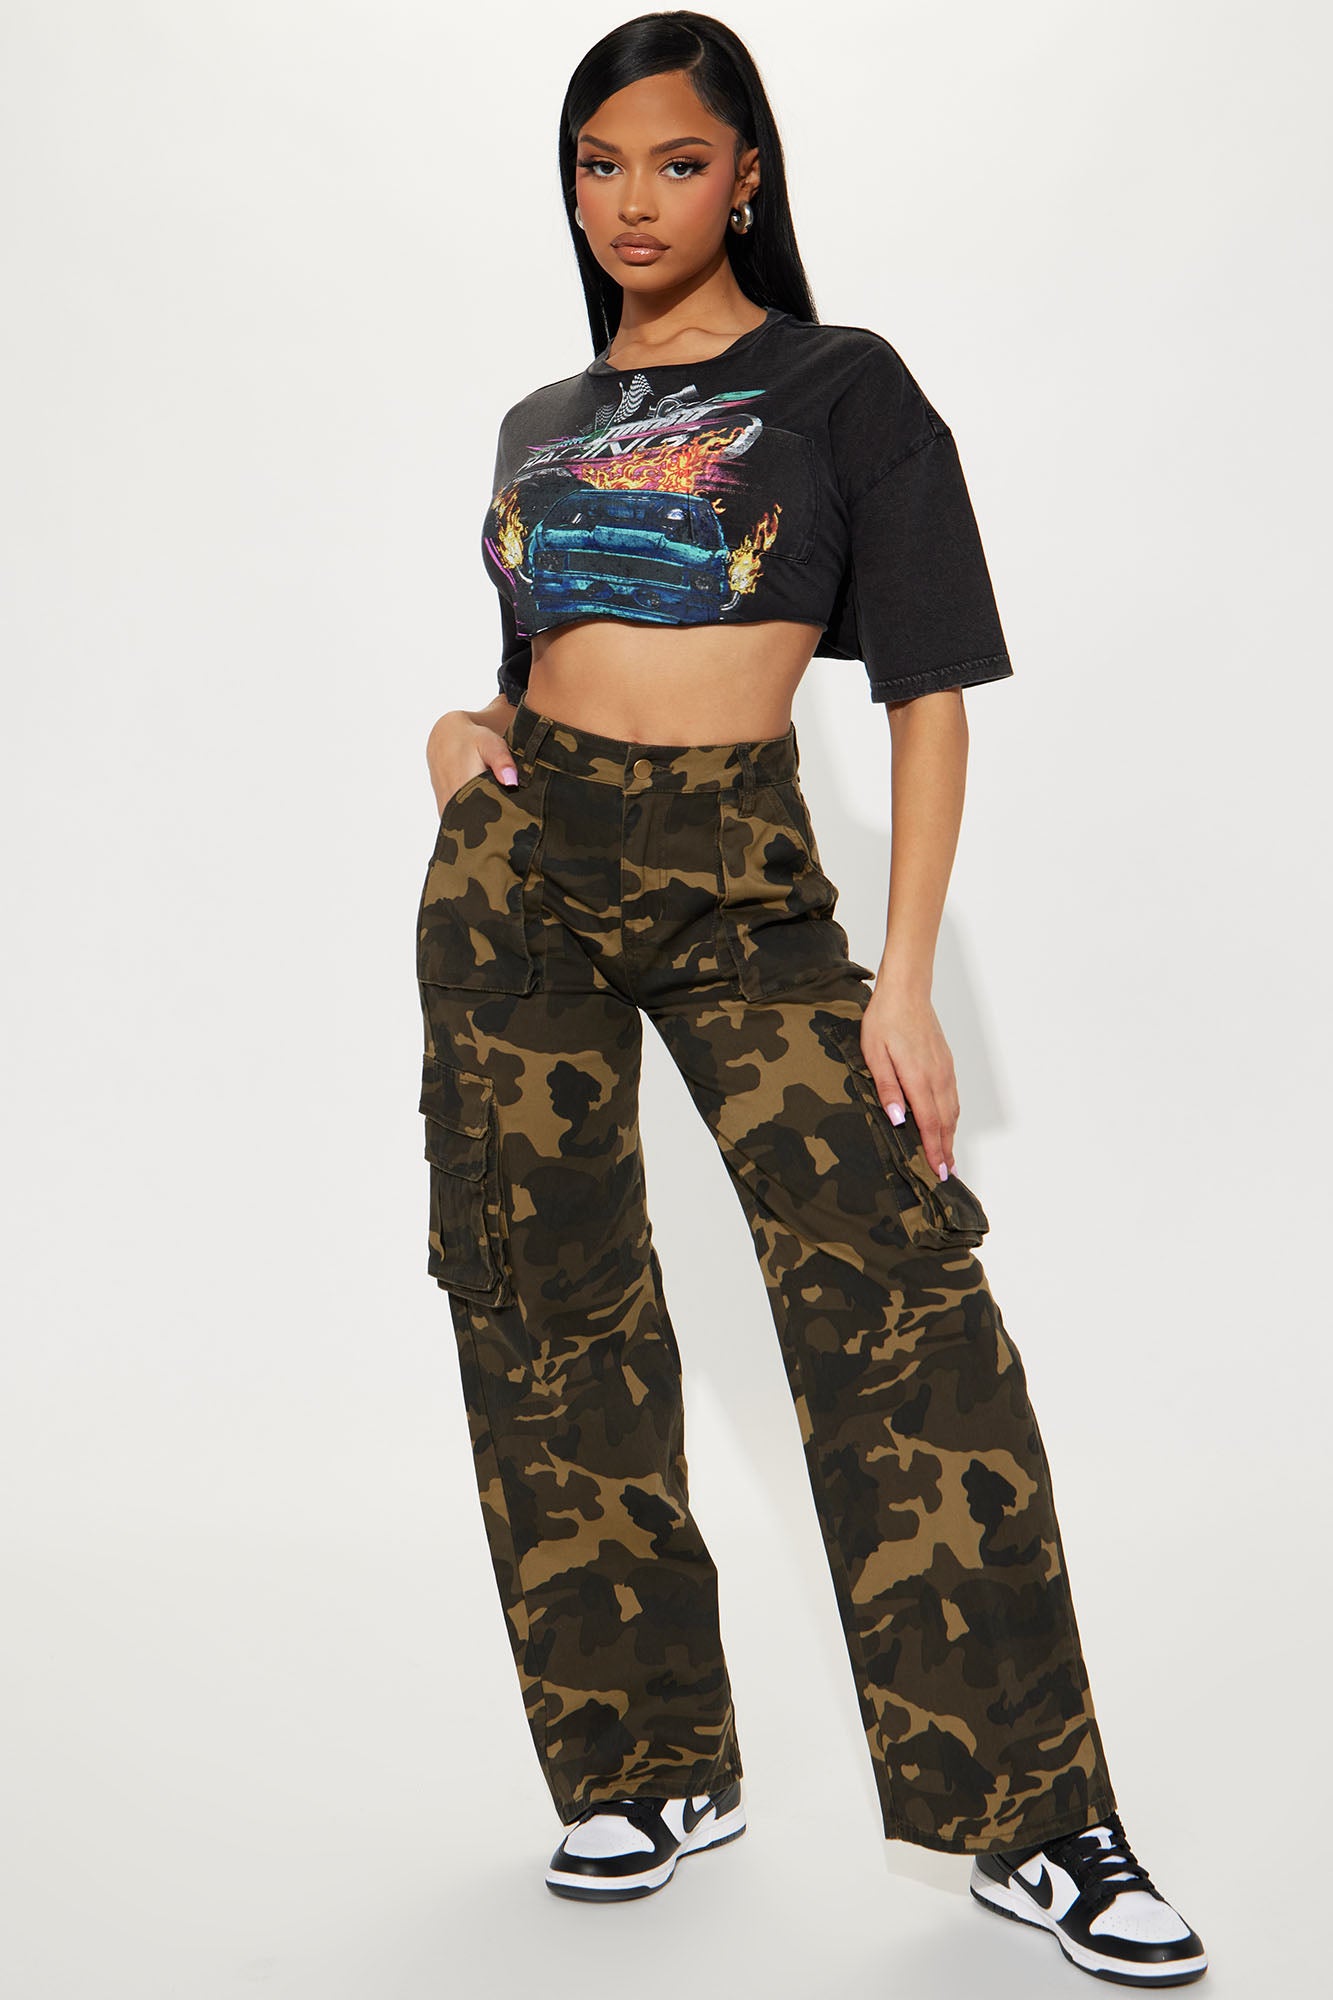 No Catching Feelings Camo Cargo Pant - Camouflage